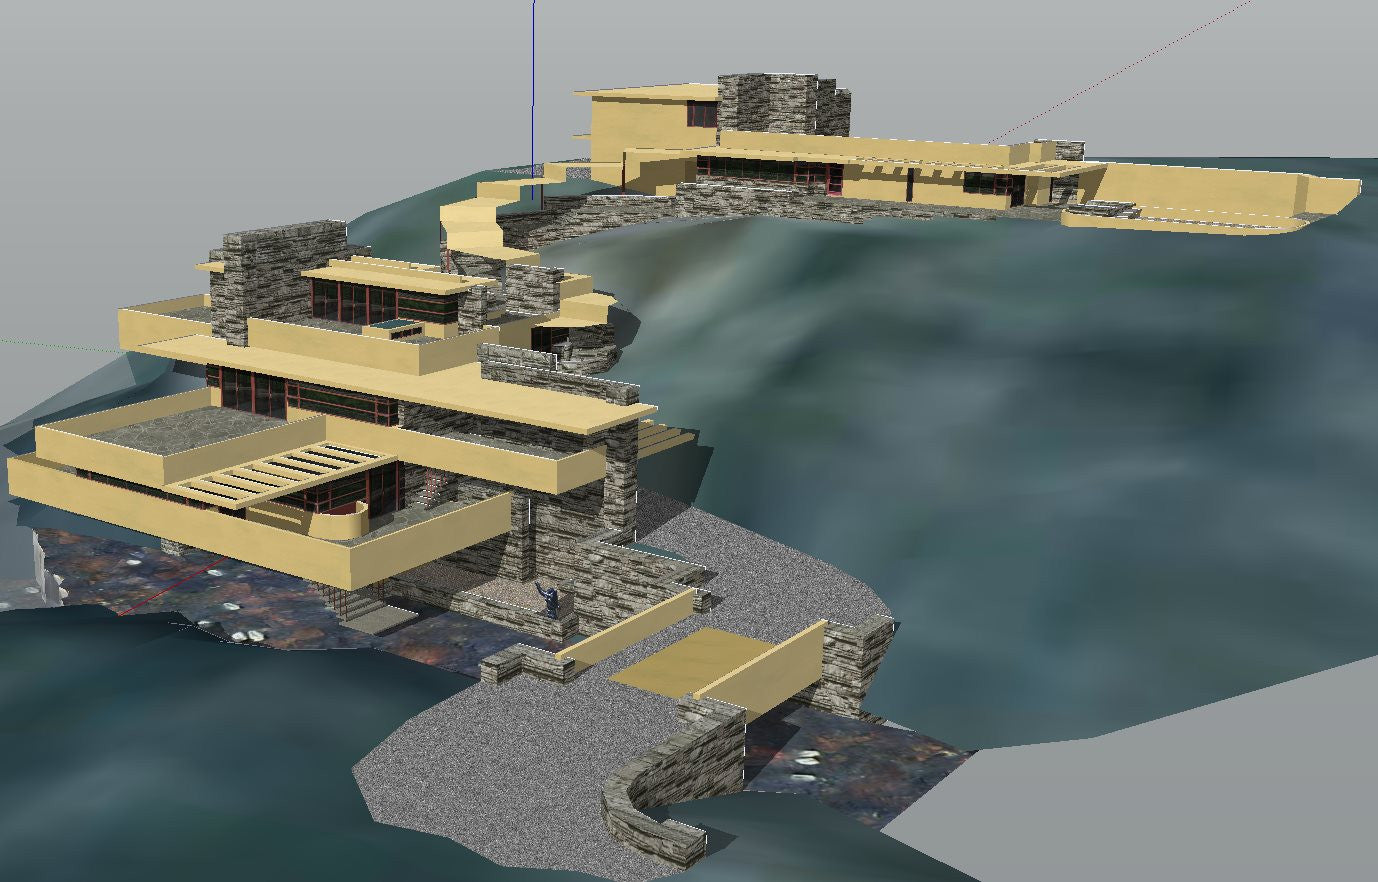 16 Projects of Frank Lloyd Wright Architecture Sketchup 3D Models(Recommanded!!)